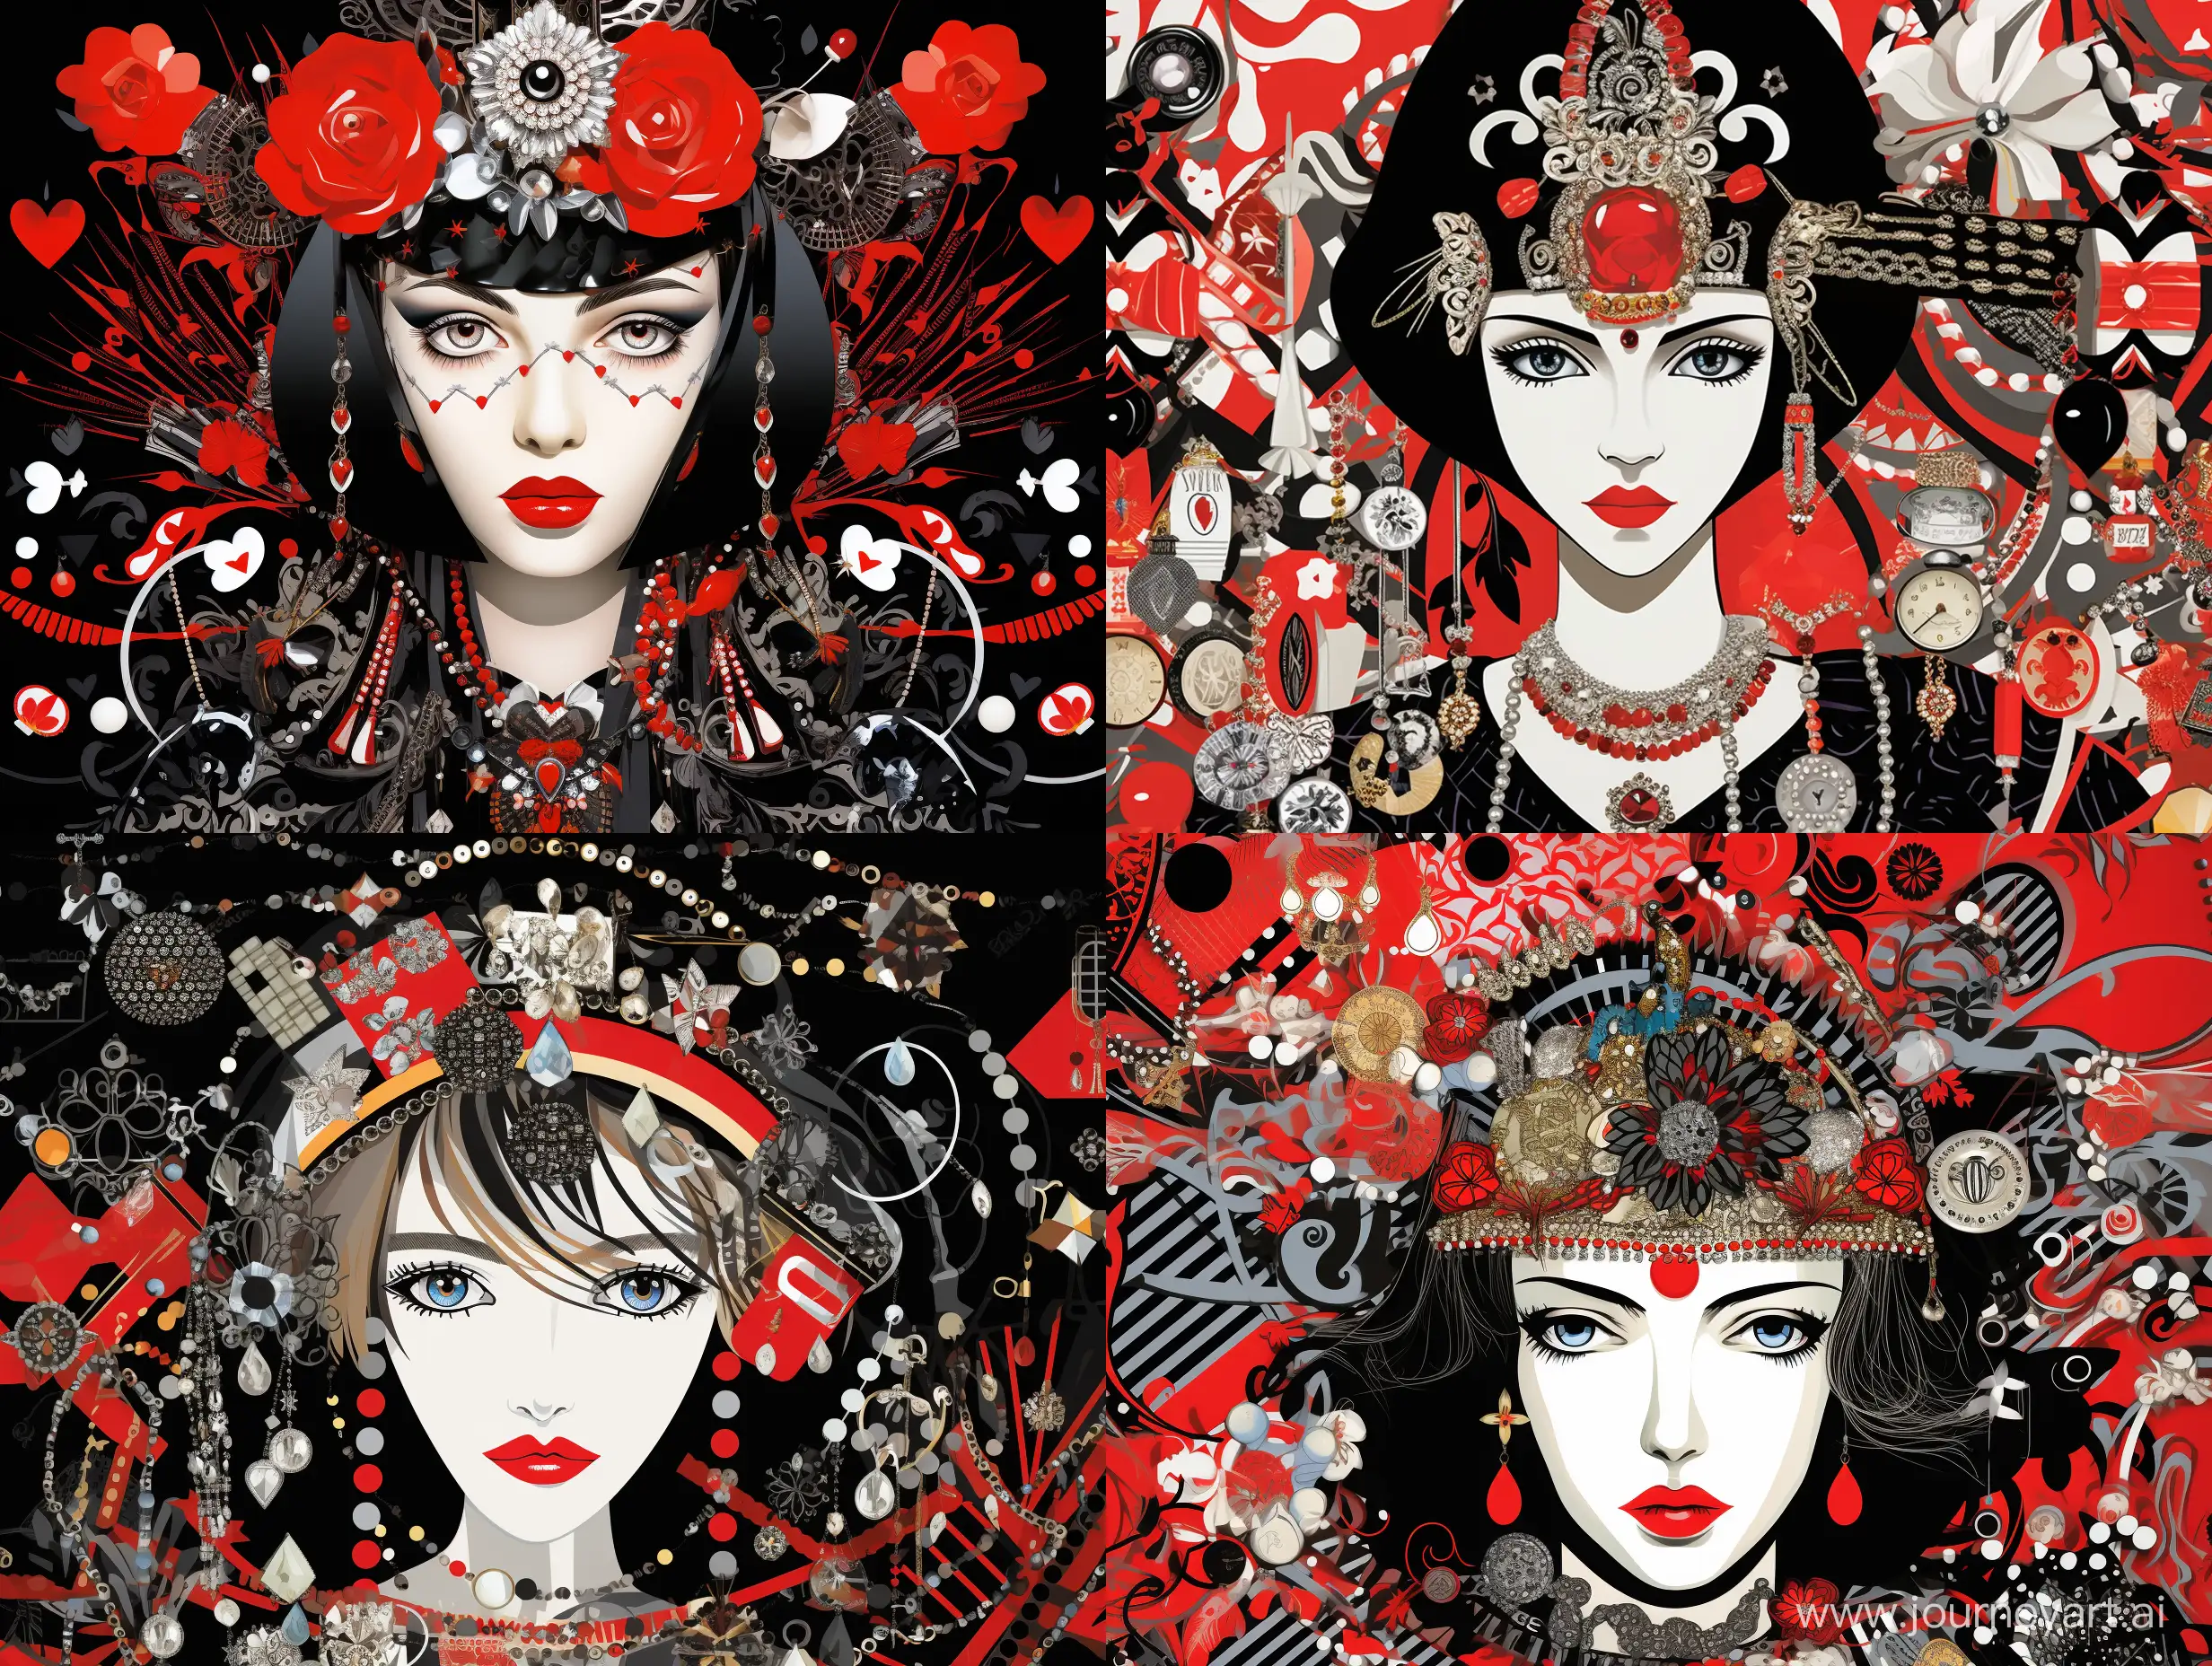 Portrait of Jeanne Lanvin, with accessories from Lanvin, with a small crown on her head, many details, complex, on the background of a pattern of diamonds, colors black, white, red, gray, caricature, pop art style, fashion illustration style